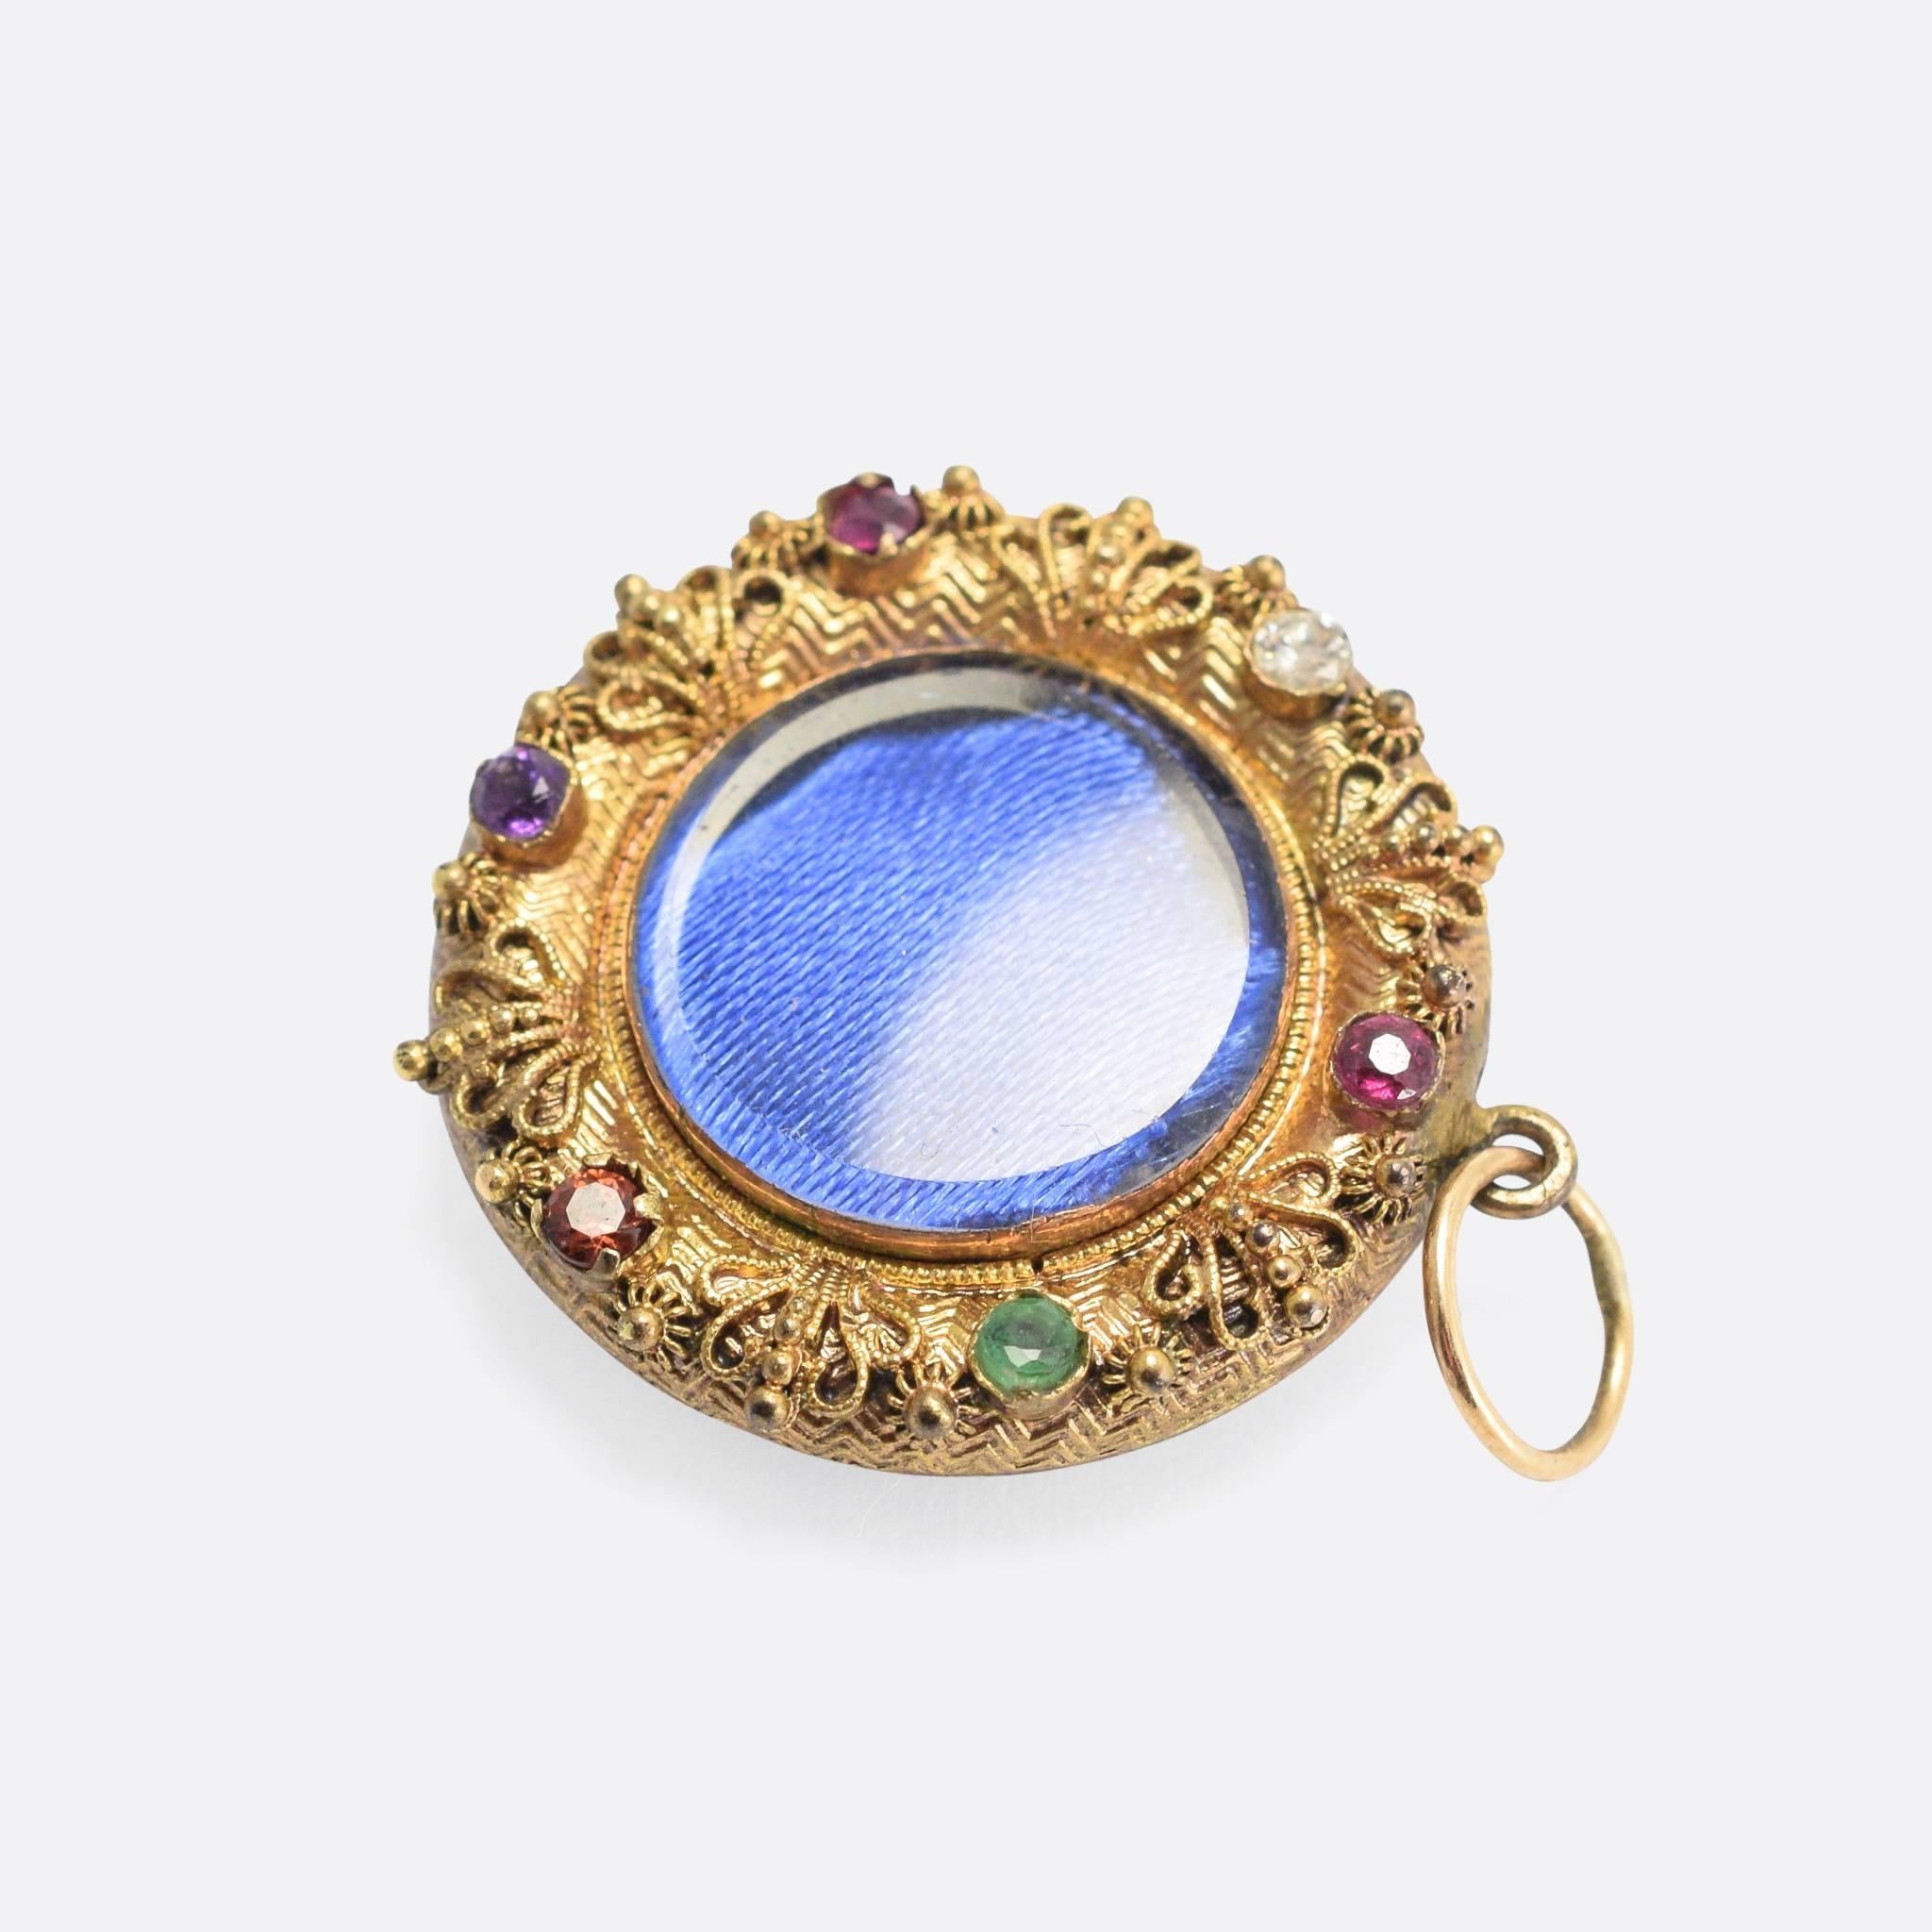 An incredible early 19th Century acrostic locket, dating to the Georgian Regency period. It features wonderfully intricate applied goldwork, with rope and beaded motifs, and superb hand-chased decoration to the front and back.
It's modelled in 15k